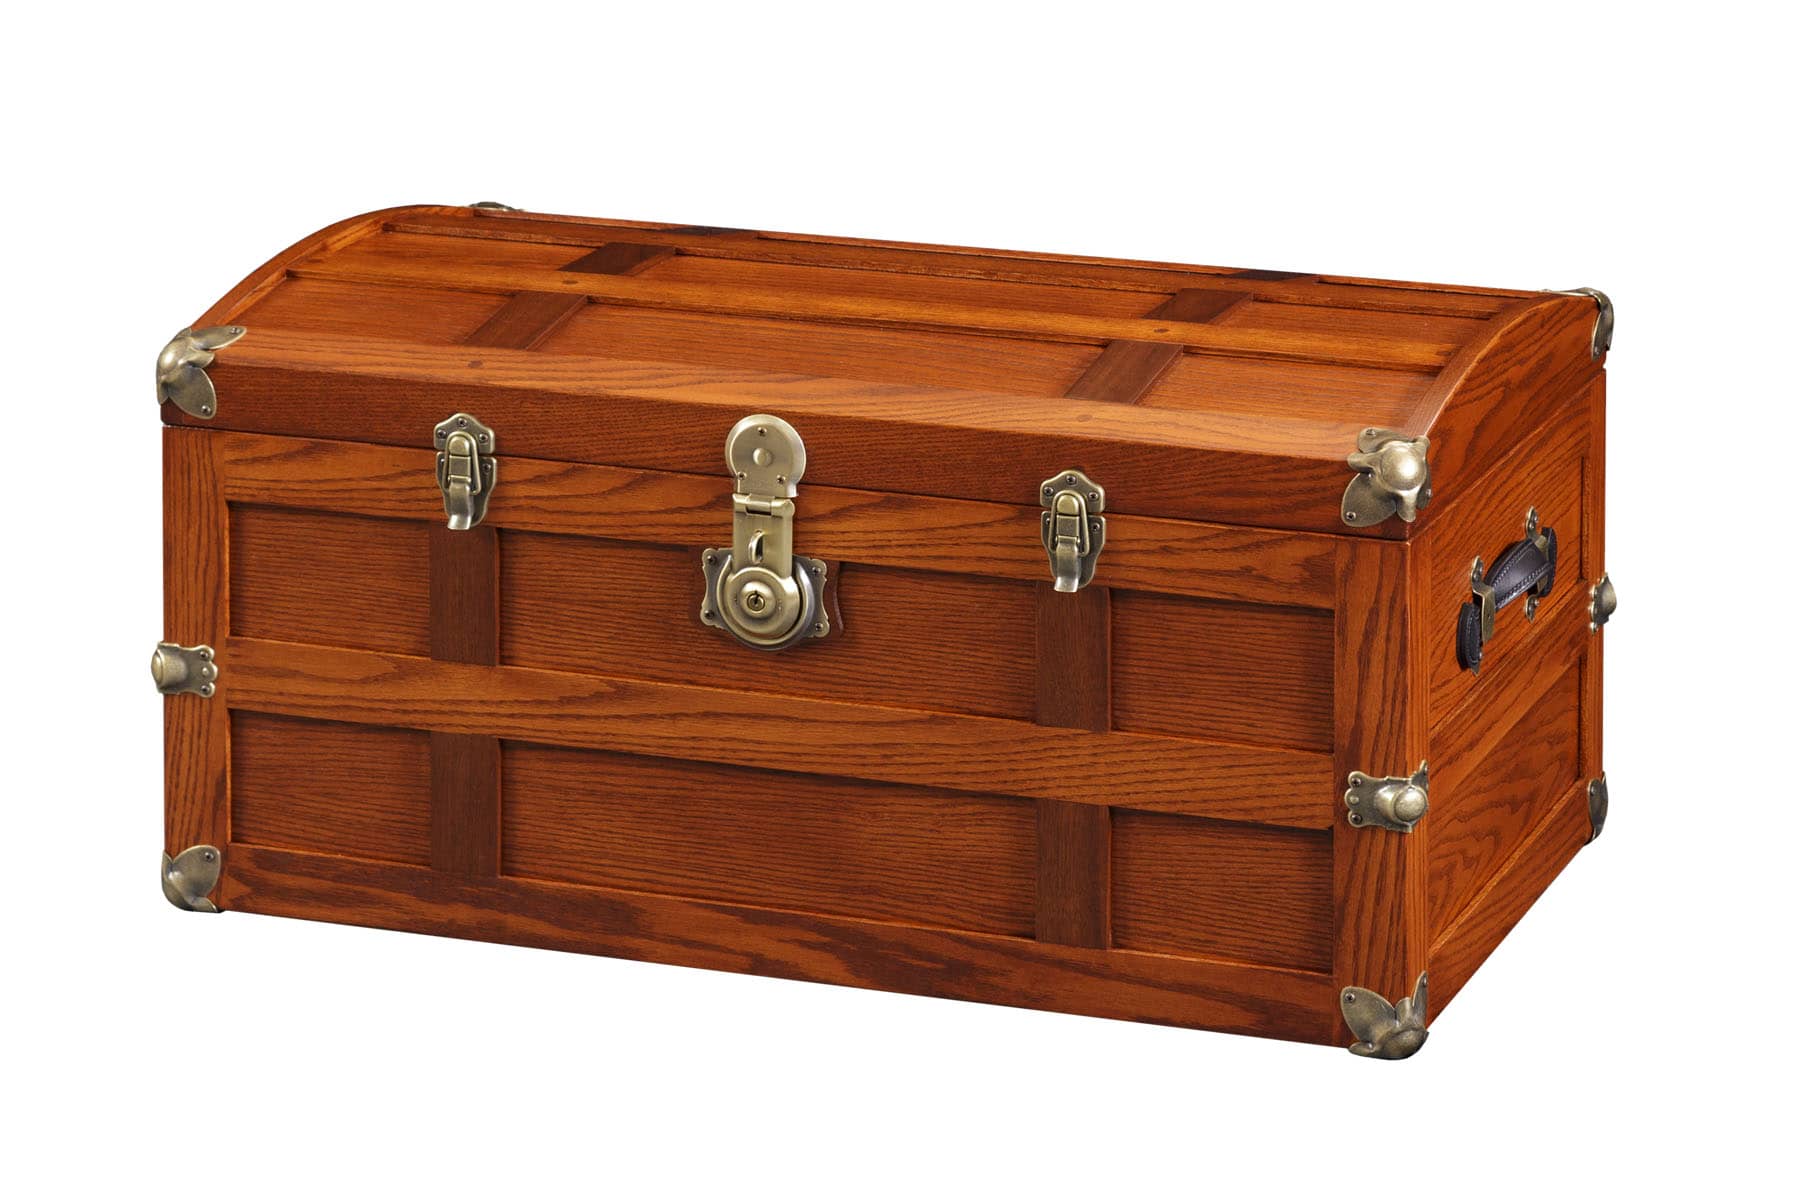 Pin on Vintage Trunks & Chests